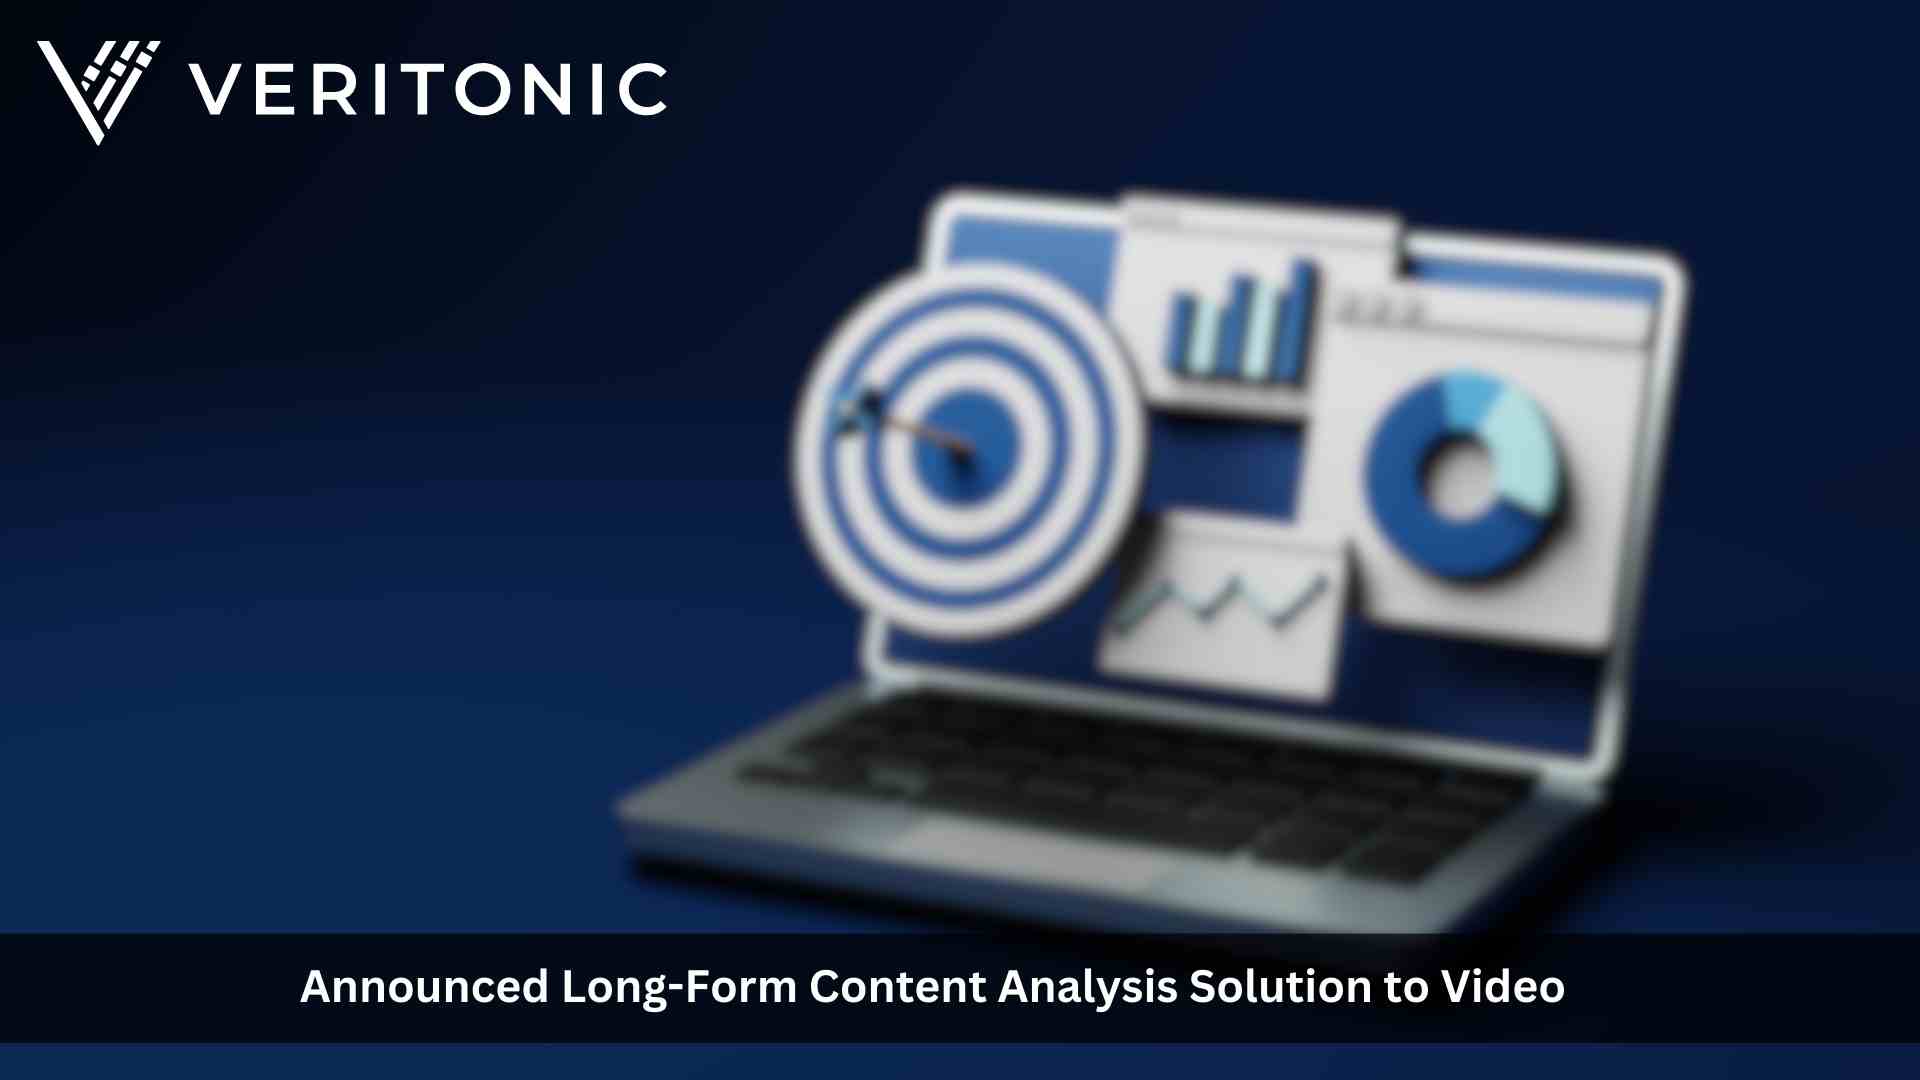 Veritonic Extends Long-Form Content Analysis Solution to Video; Delivers Unprecedented Audience Insights to Creators